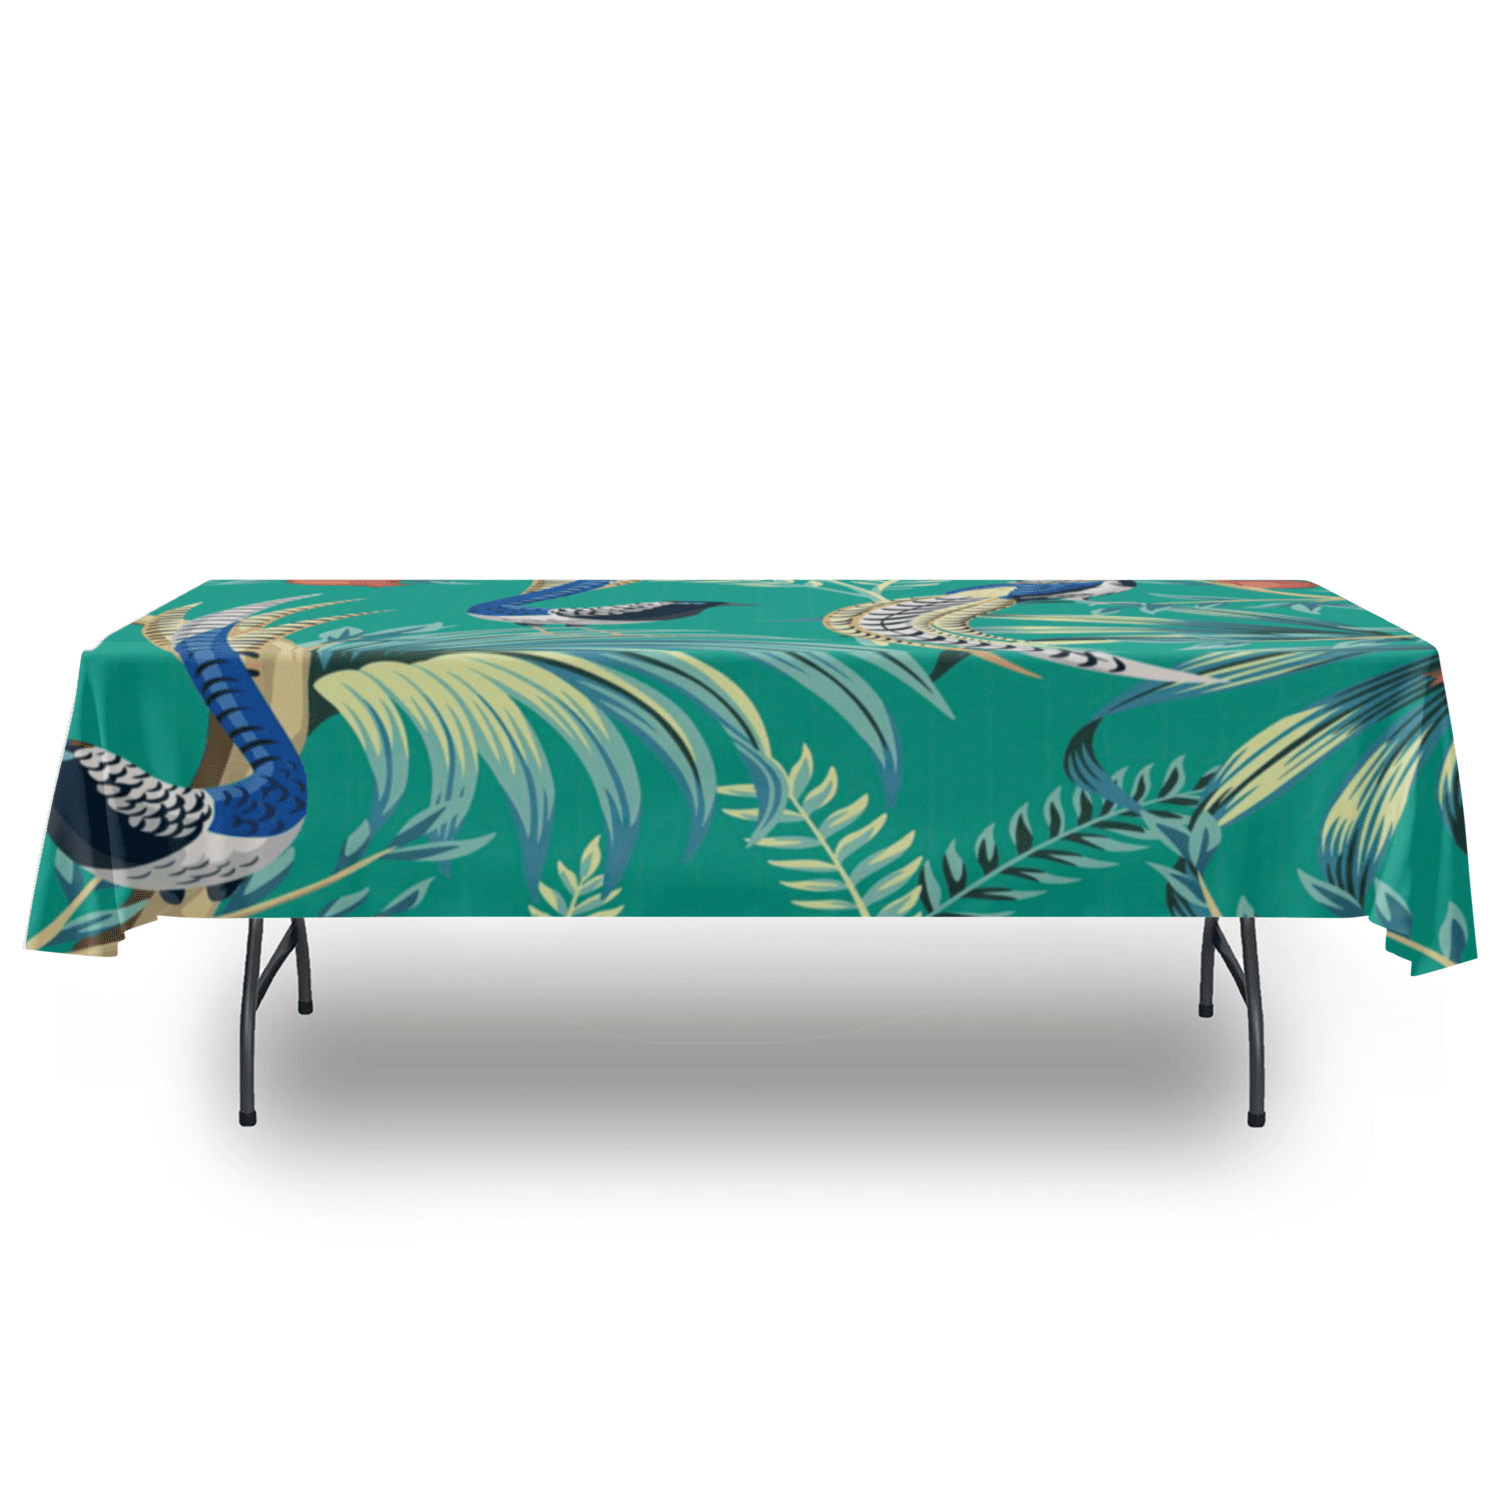 kate-mcenroe-nyc Chinoiserie Green Peacock Tablecloth Tablecloths